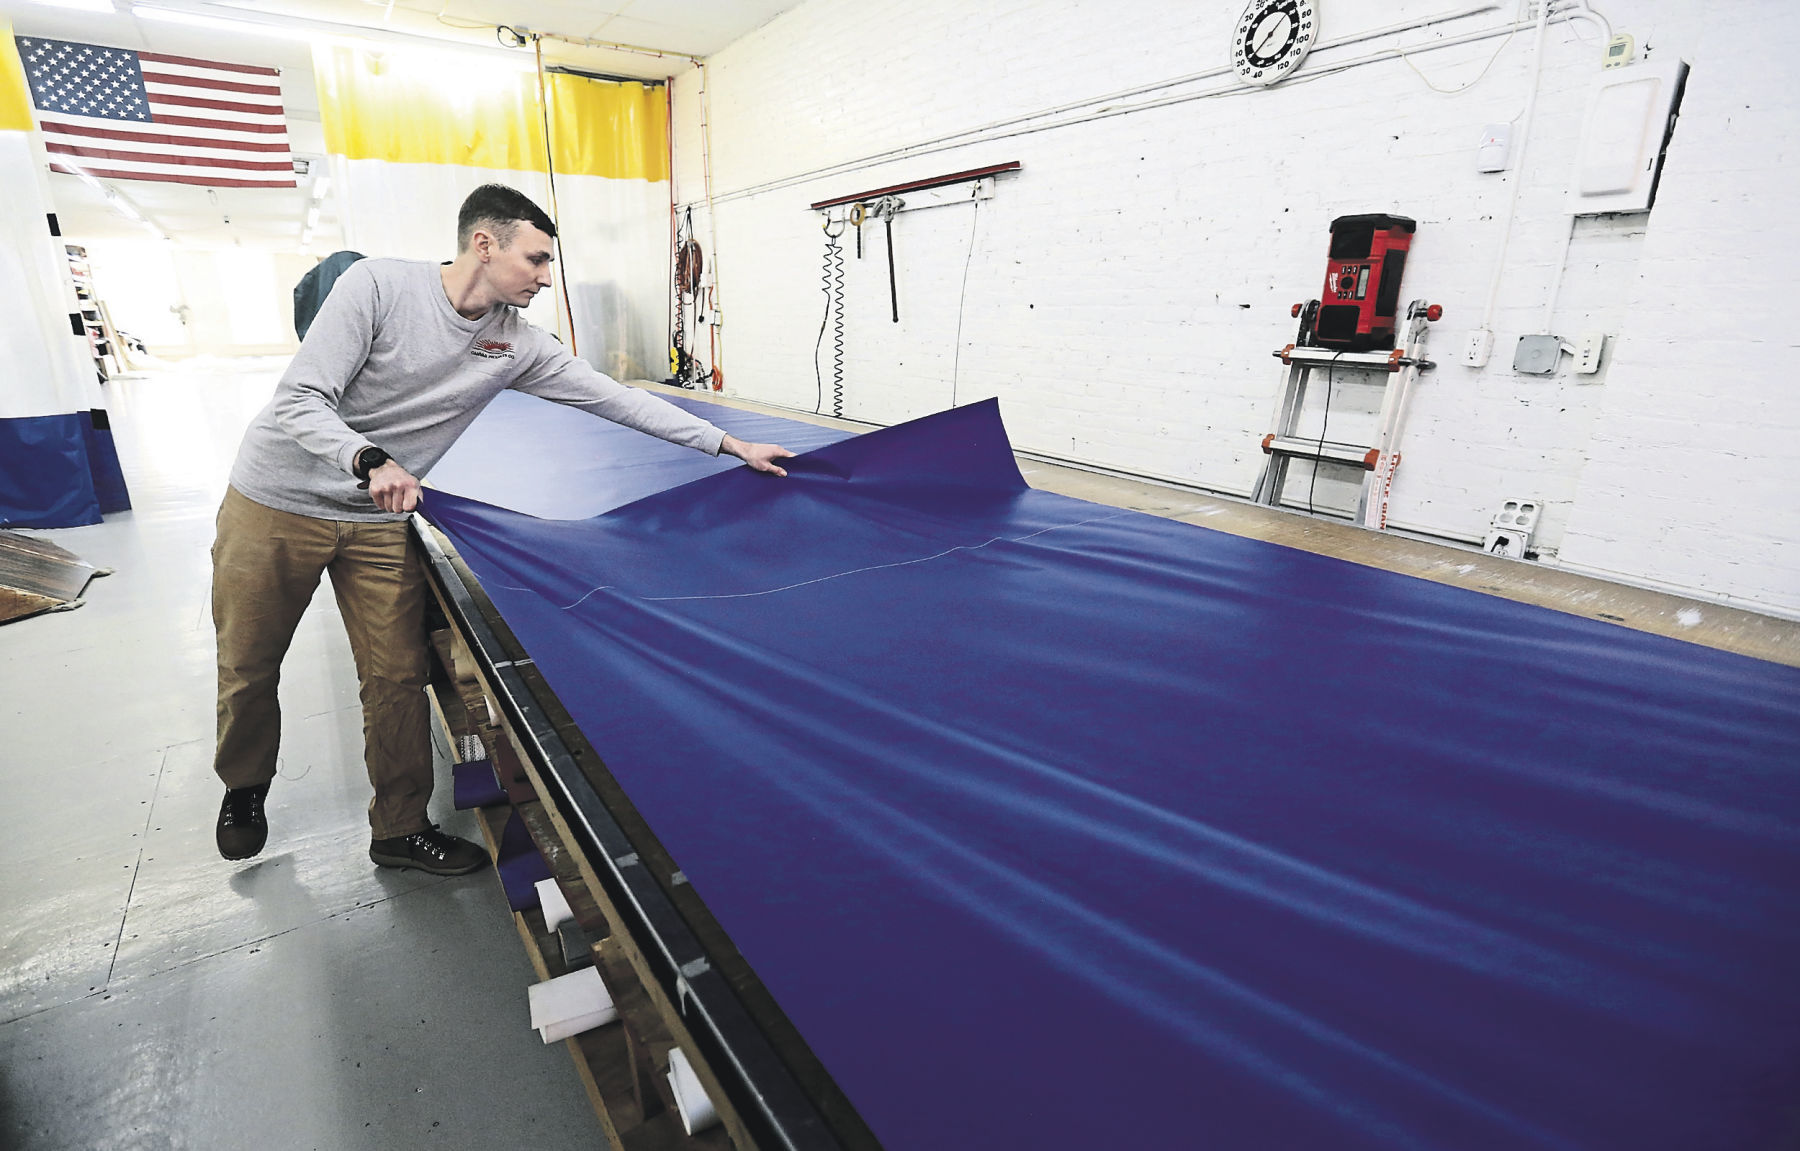 Jacob Salwolke works with a piece of vinyl at Canvas Products Co. The Salwolke clan has owned the business for nearly 50 years. The company produces a number of products, with its awnings the most prevalent. Through the decades, the company has sought to incorporate new technologies and processes.    PHOTO CREDIT: JESSICA REILLY